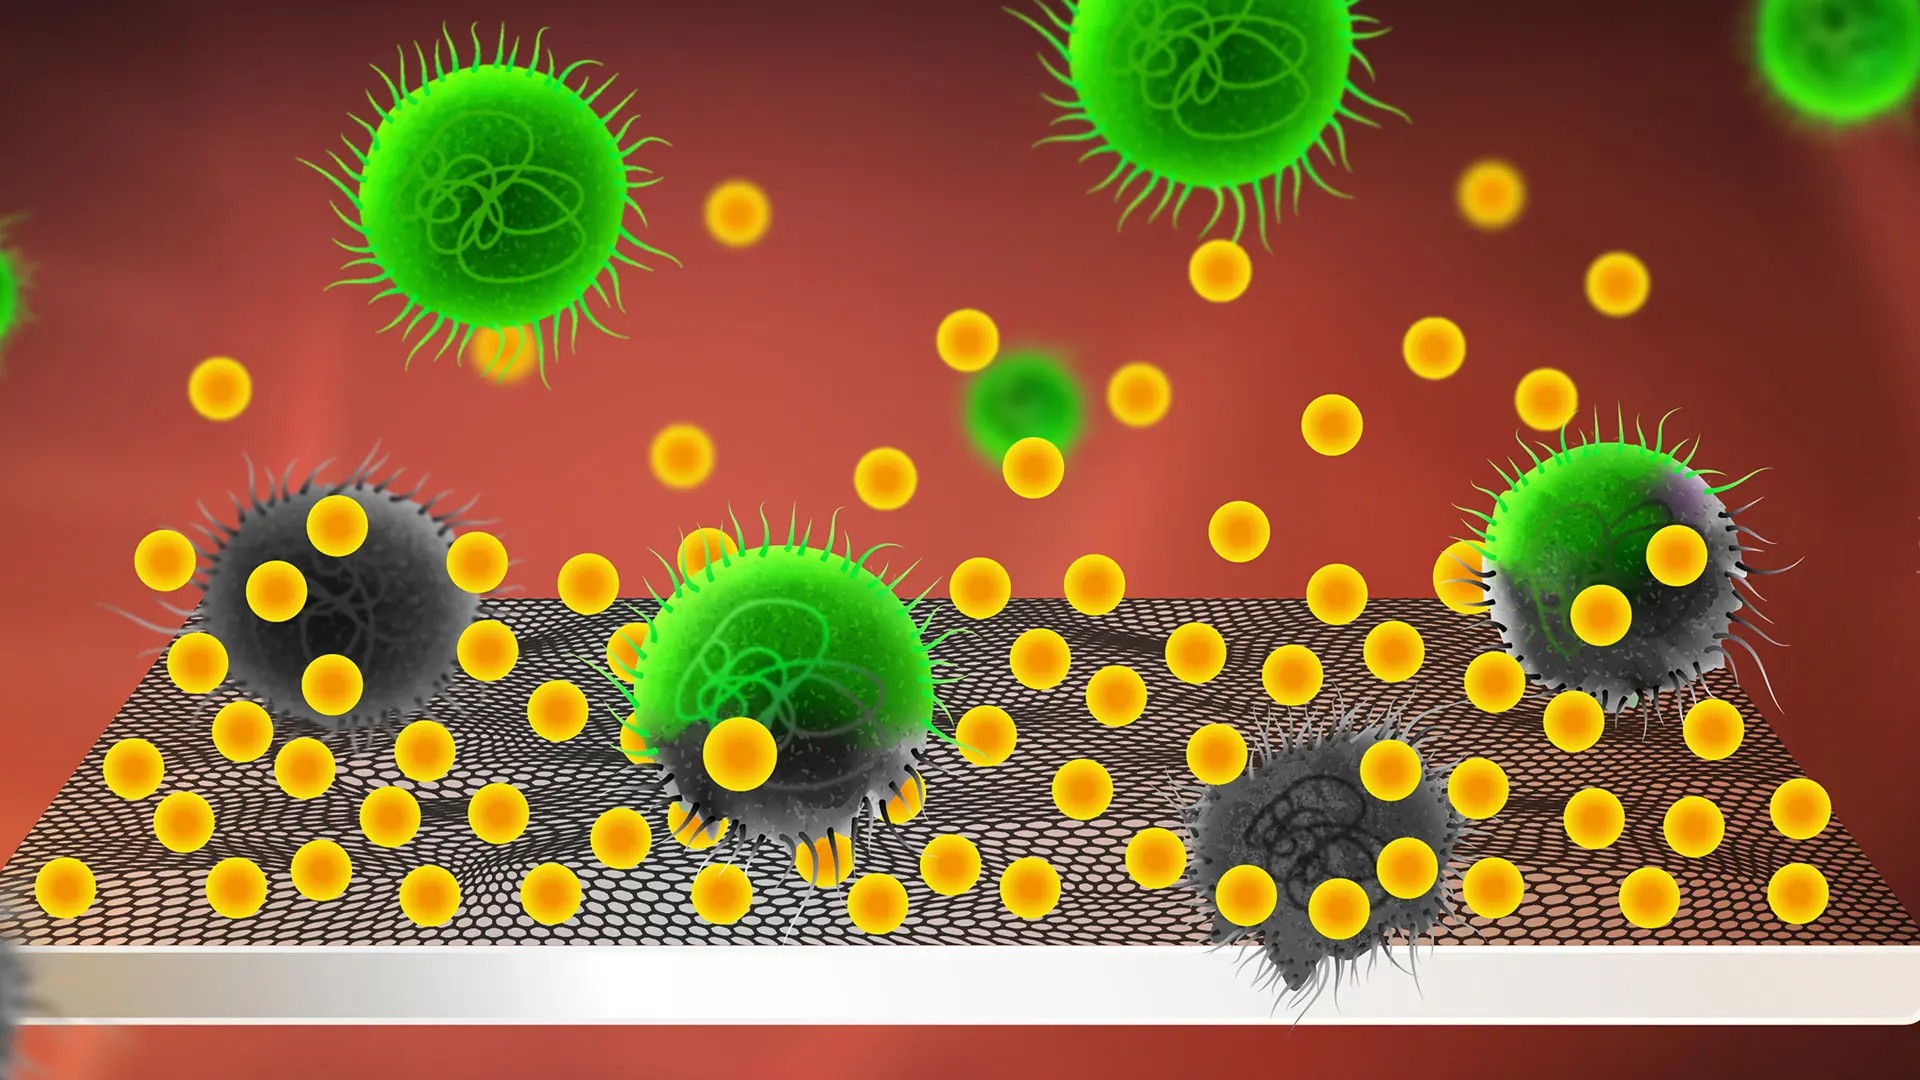 Usnic acin on a graphene coated surface sorrounded by bacteria, illustration. 